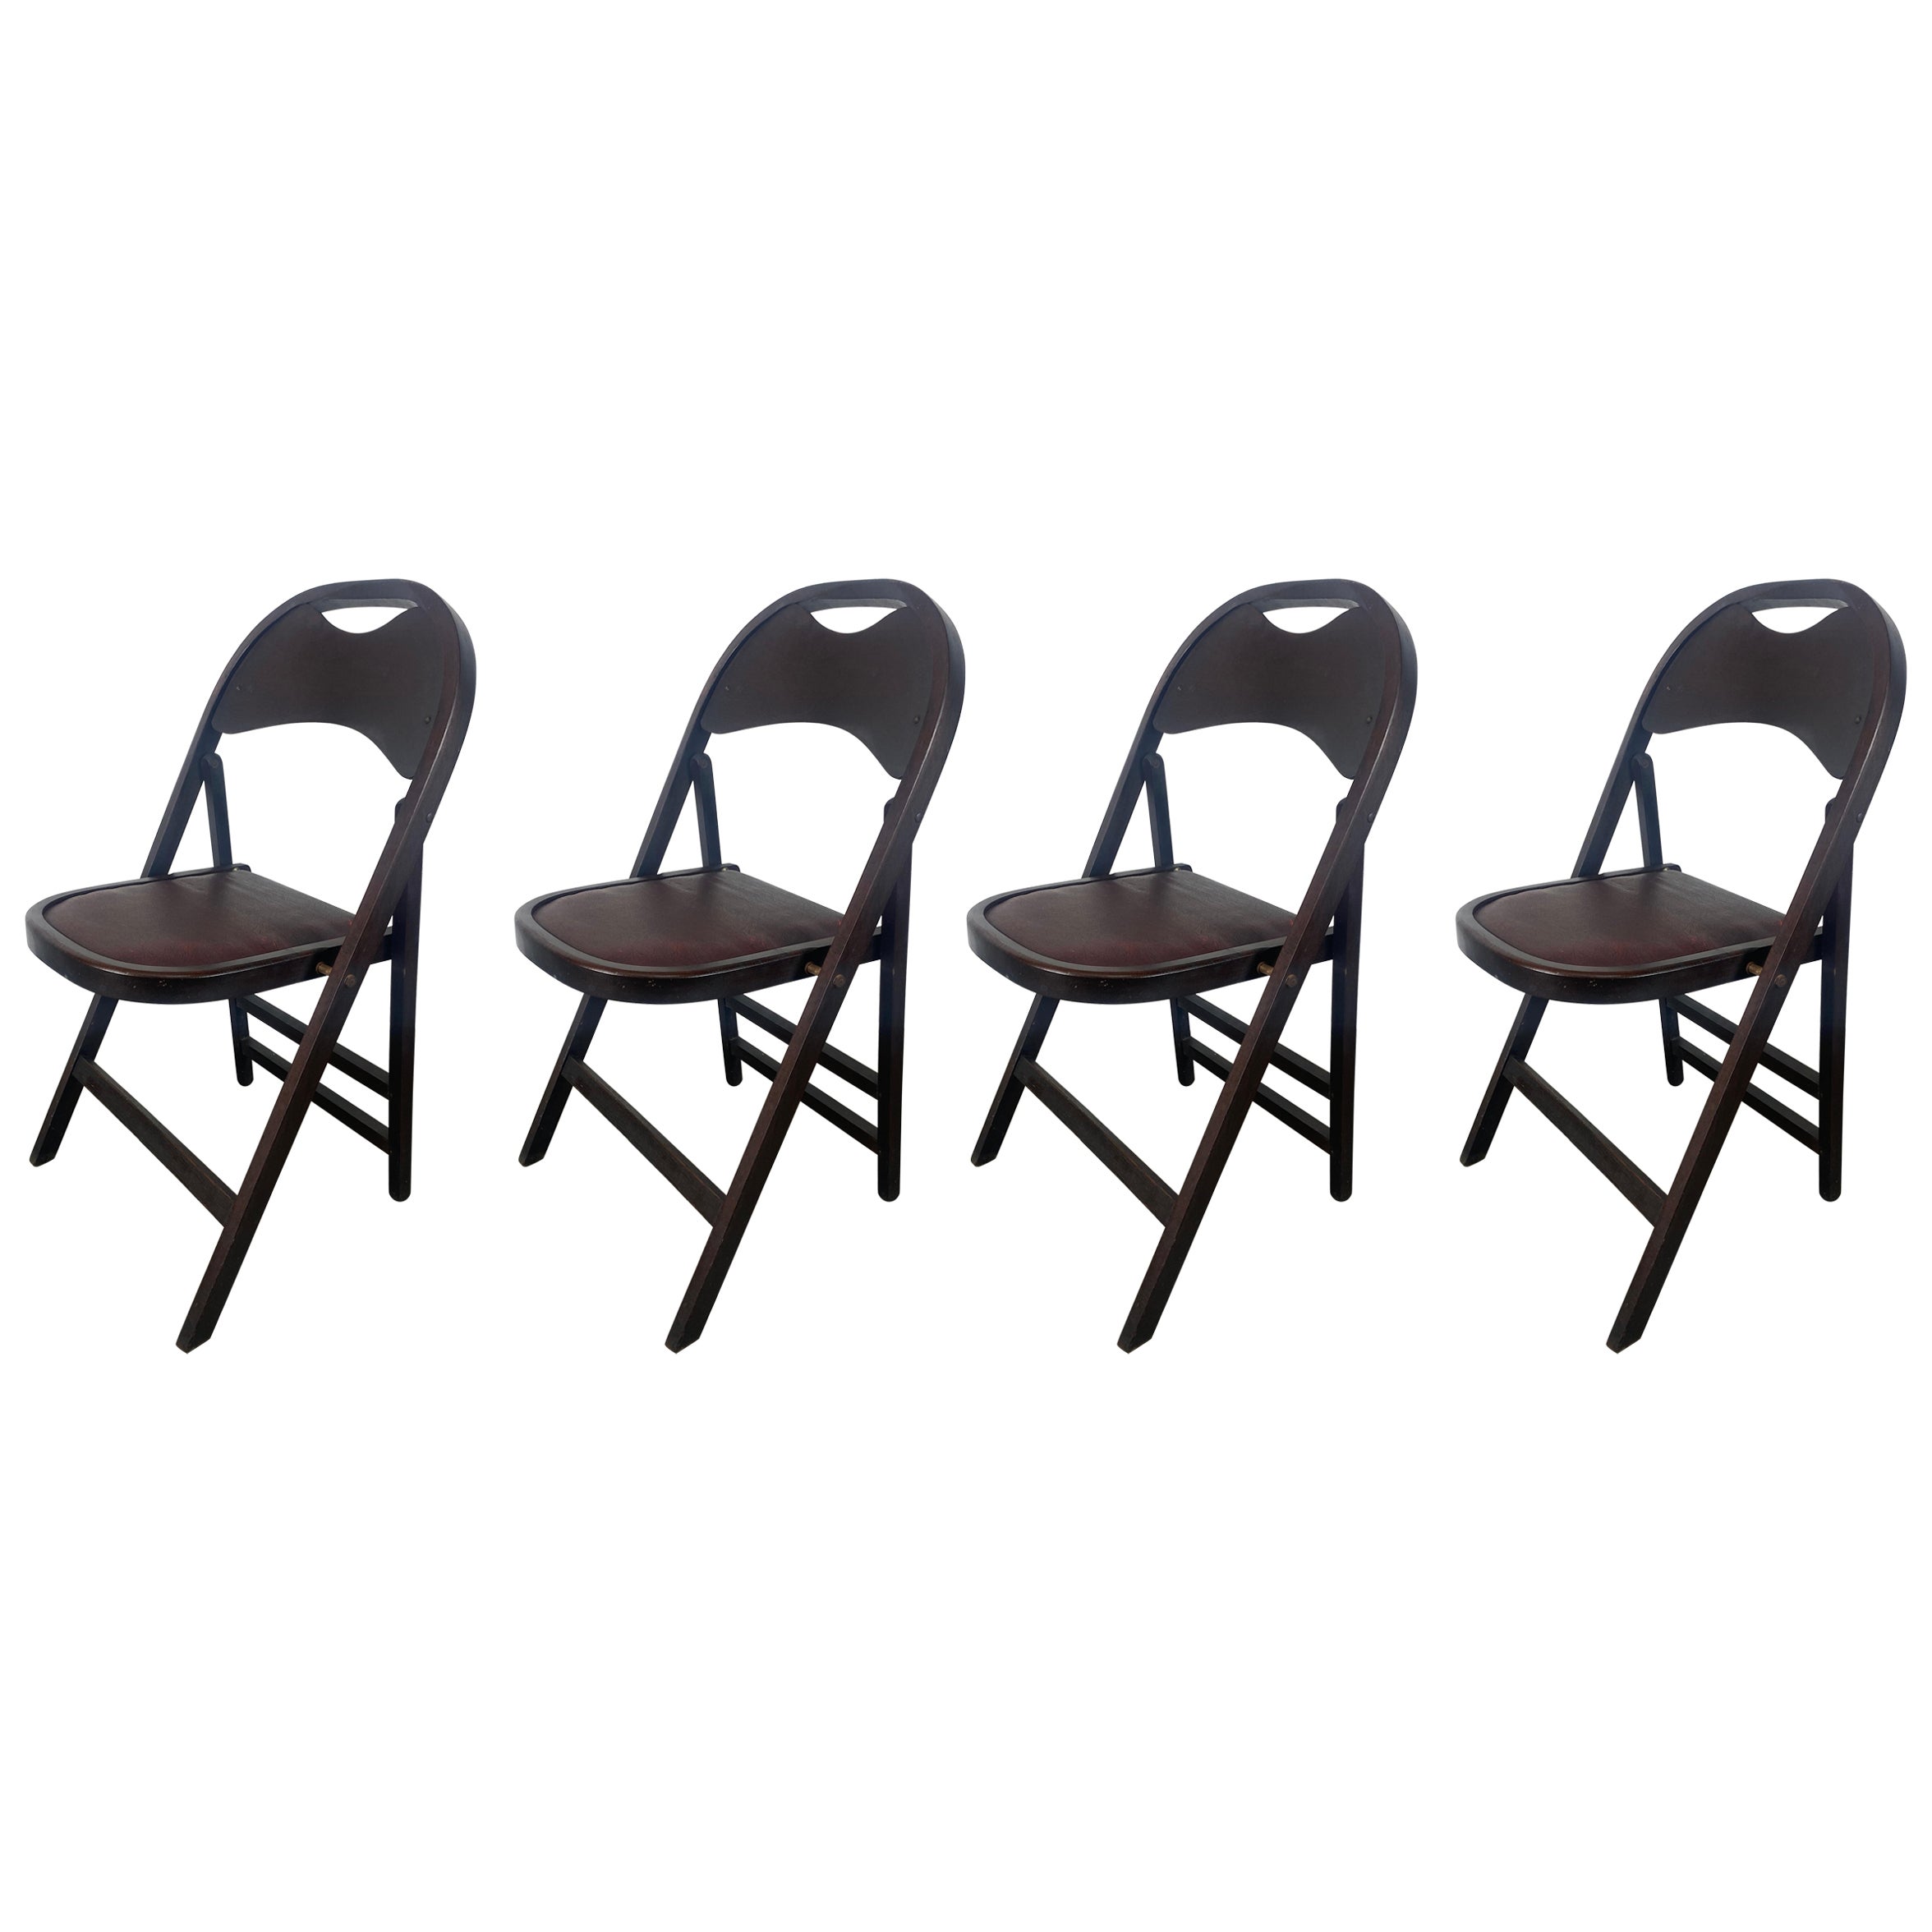 Set 4 Classic Bauhaus Thonet Style Folding Chairs manufactured by Stakmore For Sale